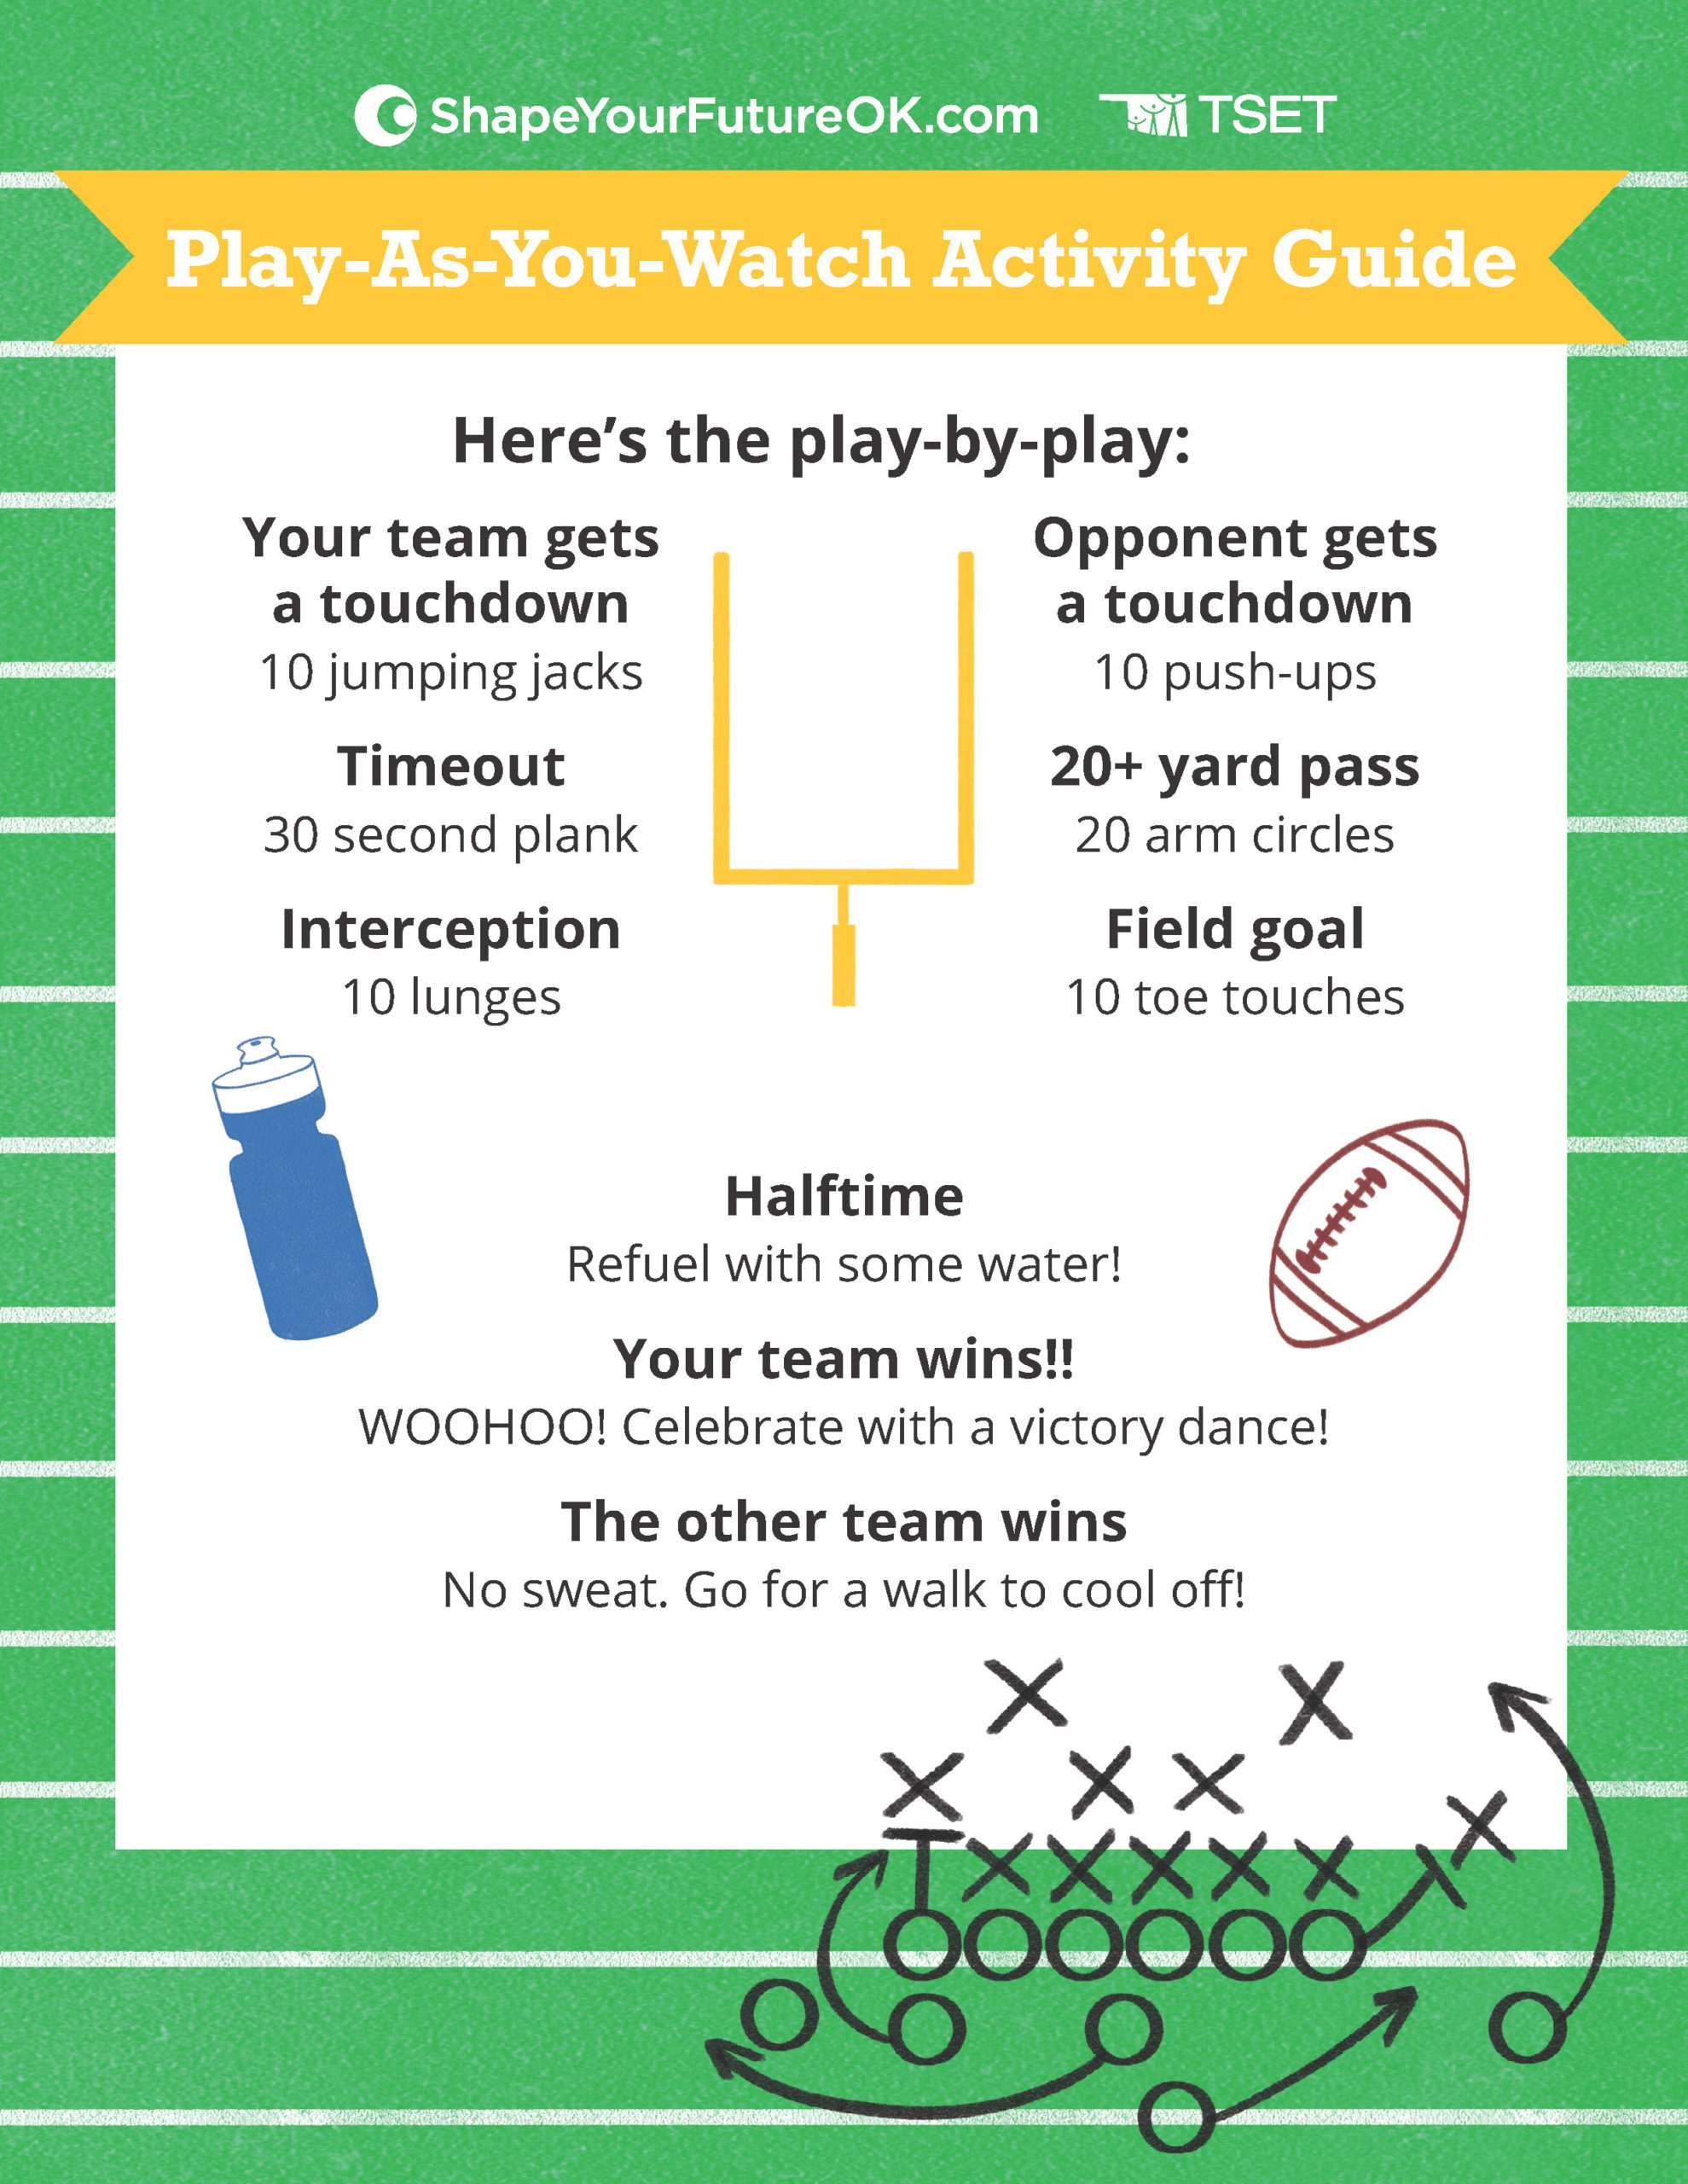 Play-As-You-Watch Football Activity Guide